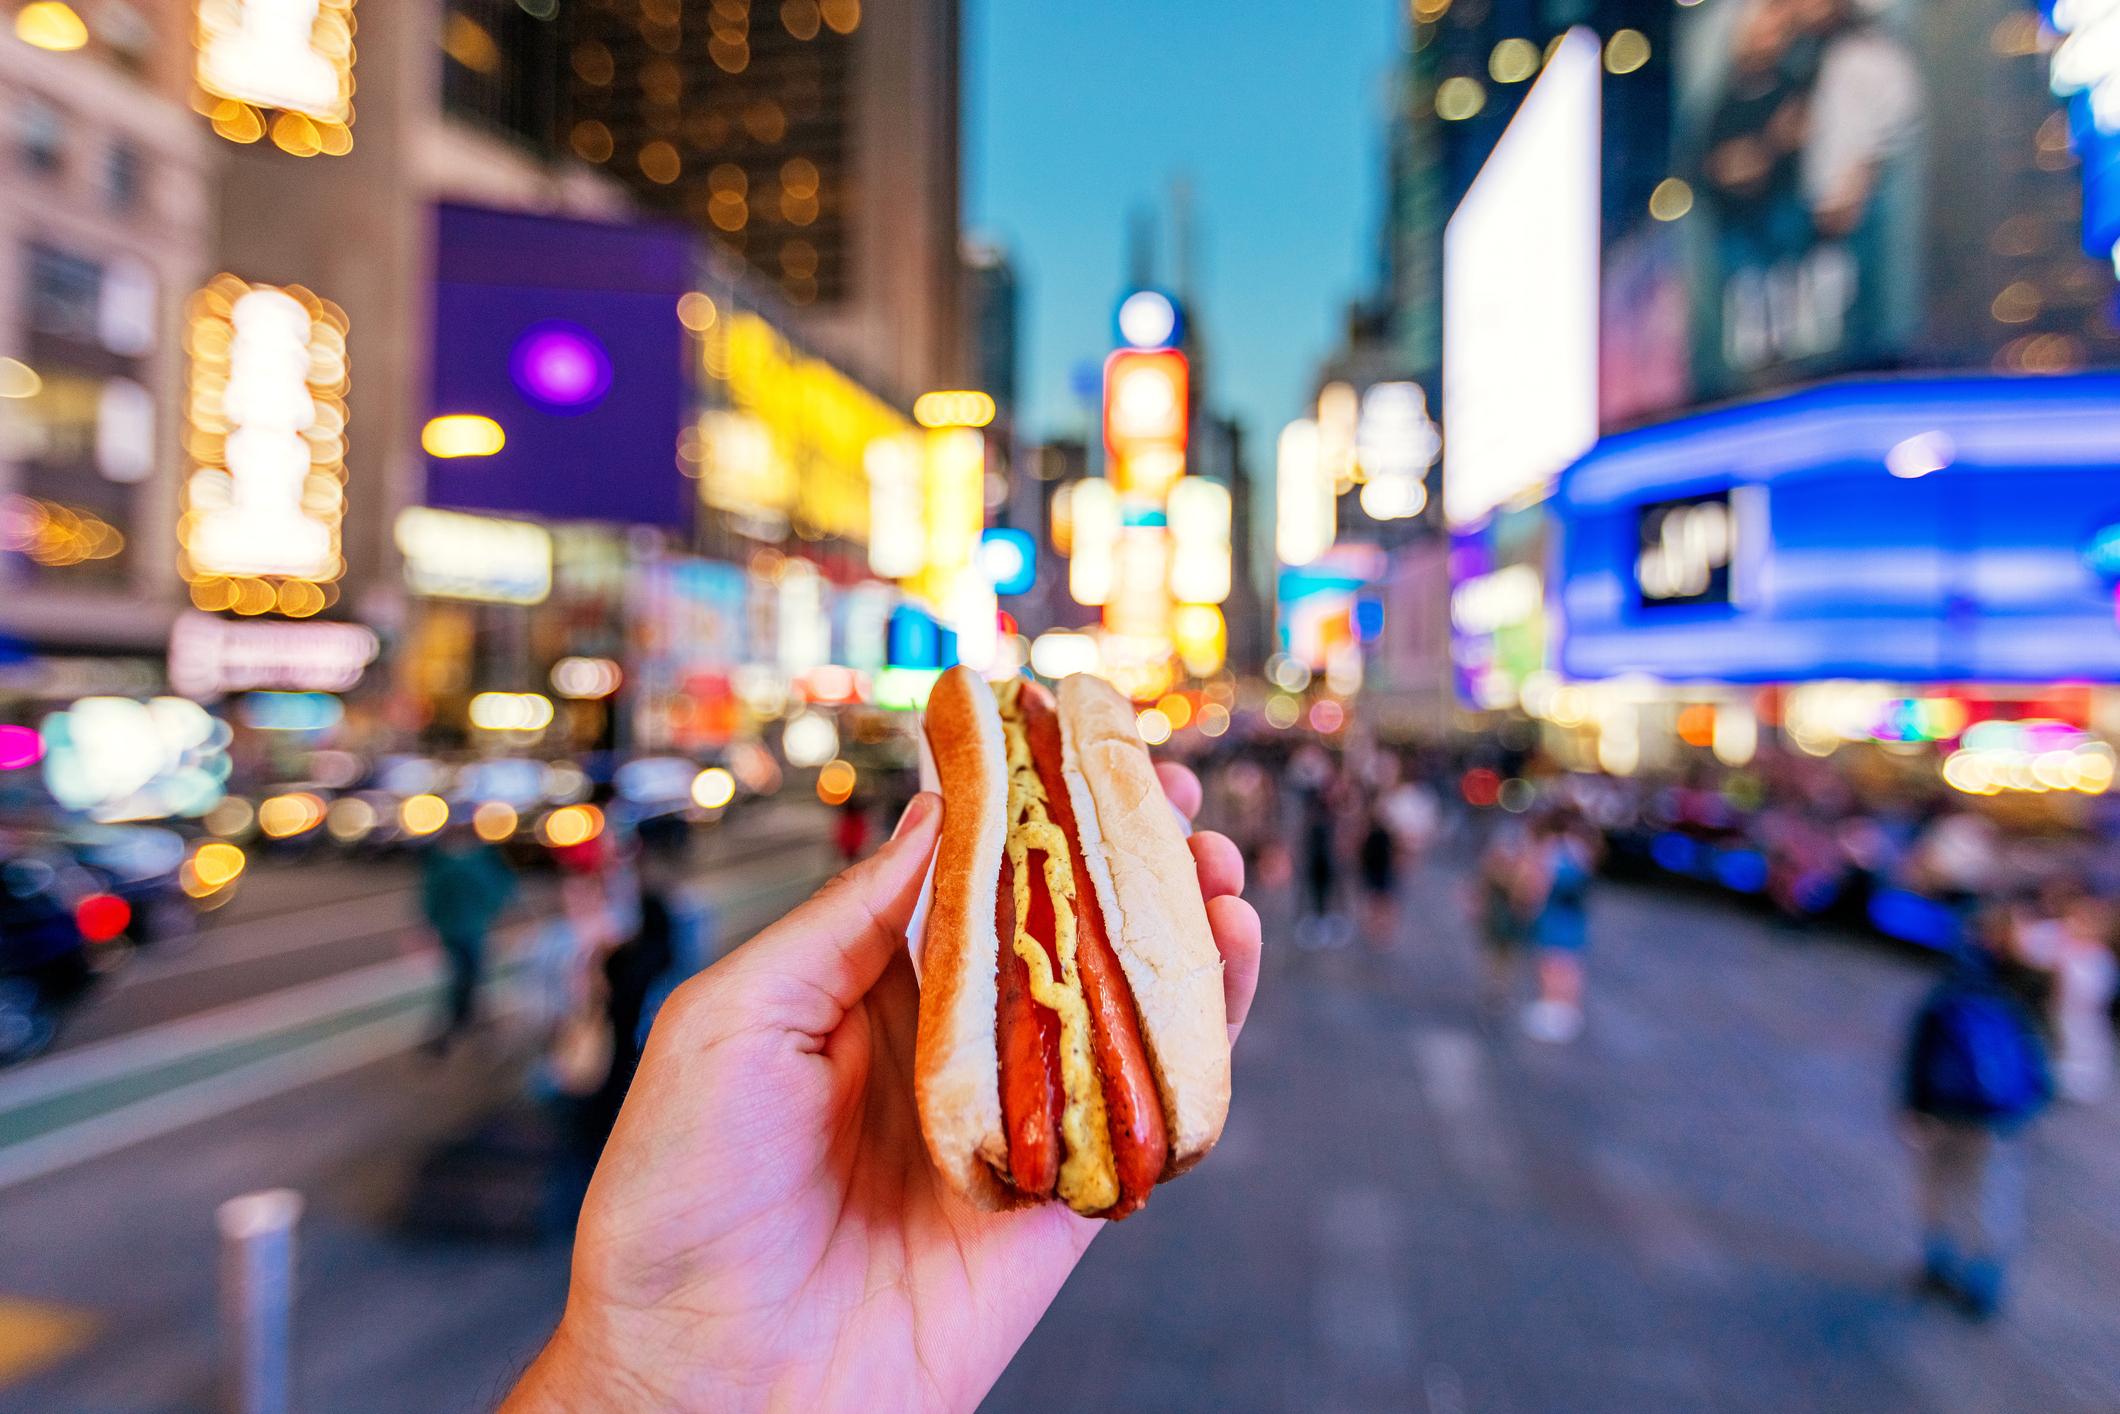  A person holding a hot dog on the streets of New York, USA 